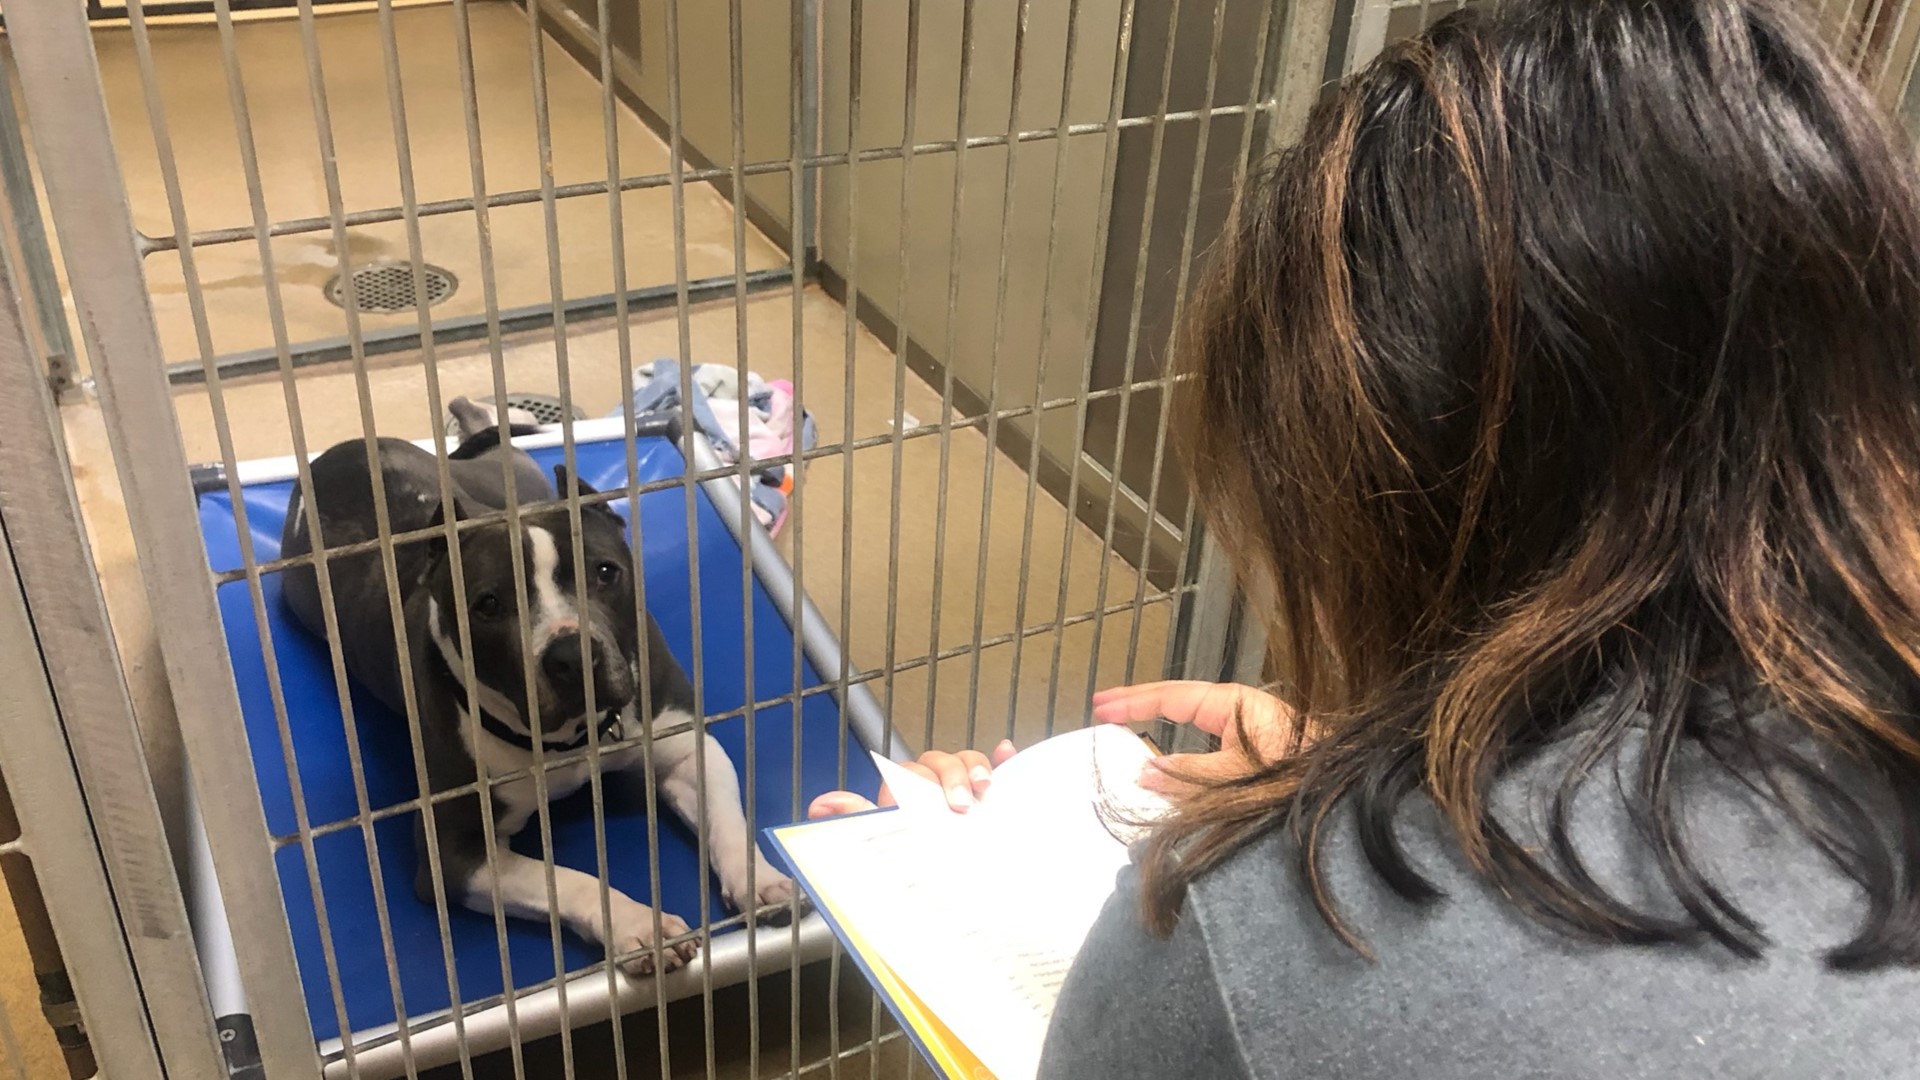 Instead of lighting off fireworks or grilling outside, many people spent their 4th of July evening comforting the shelter dogs at the Bradshaw Animal Shelter for a program that shelter is calling a huge success.